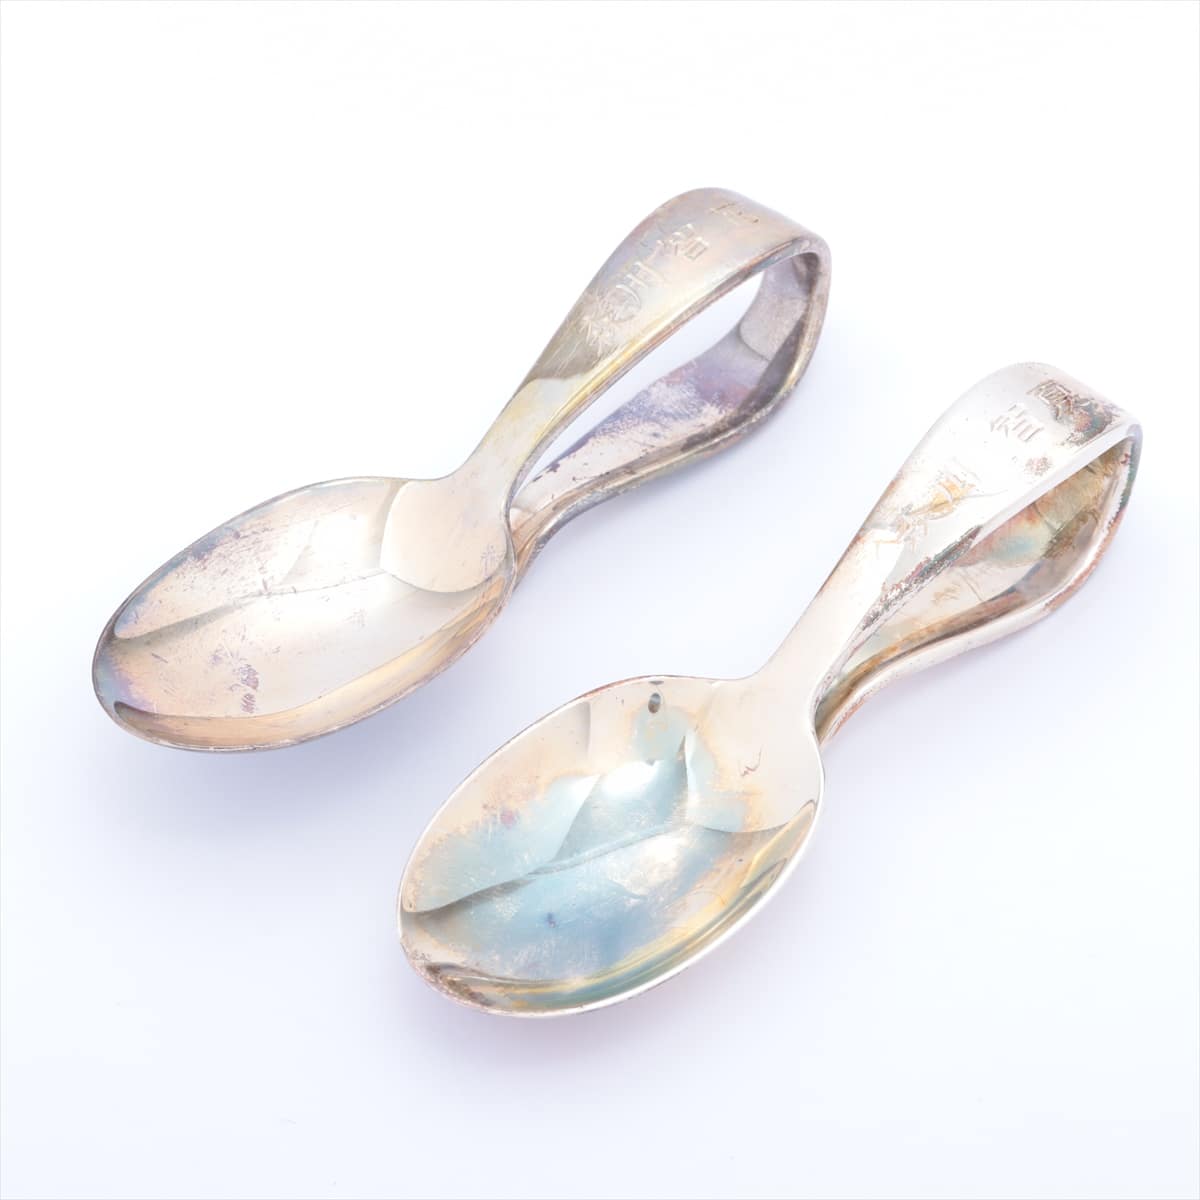 Tiffany Other 925 Silver baby spoon 2 piece set